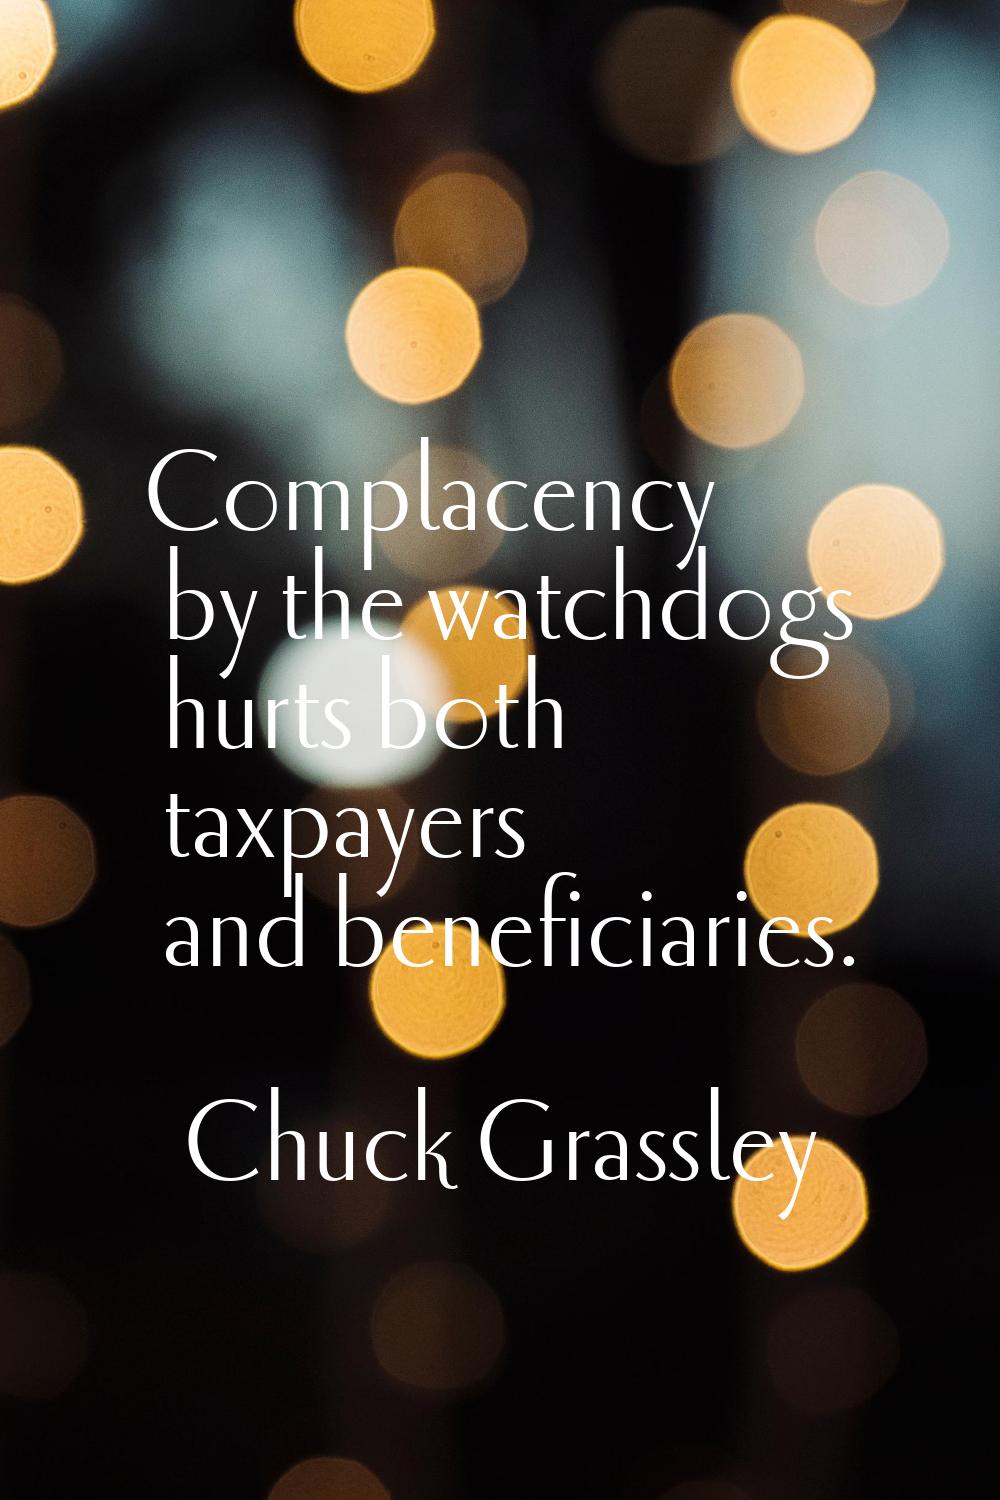 Complacency by the watchdogs hurts both taxpayers and beneficiaries.